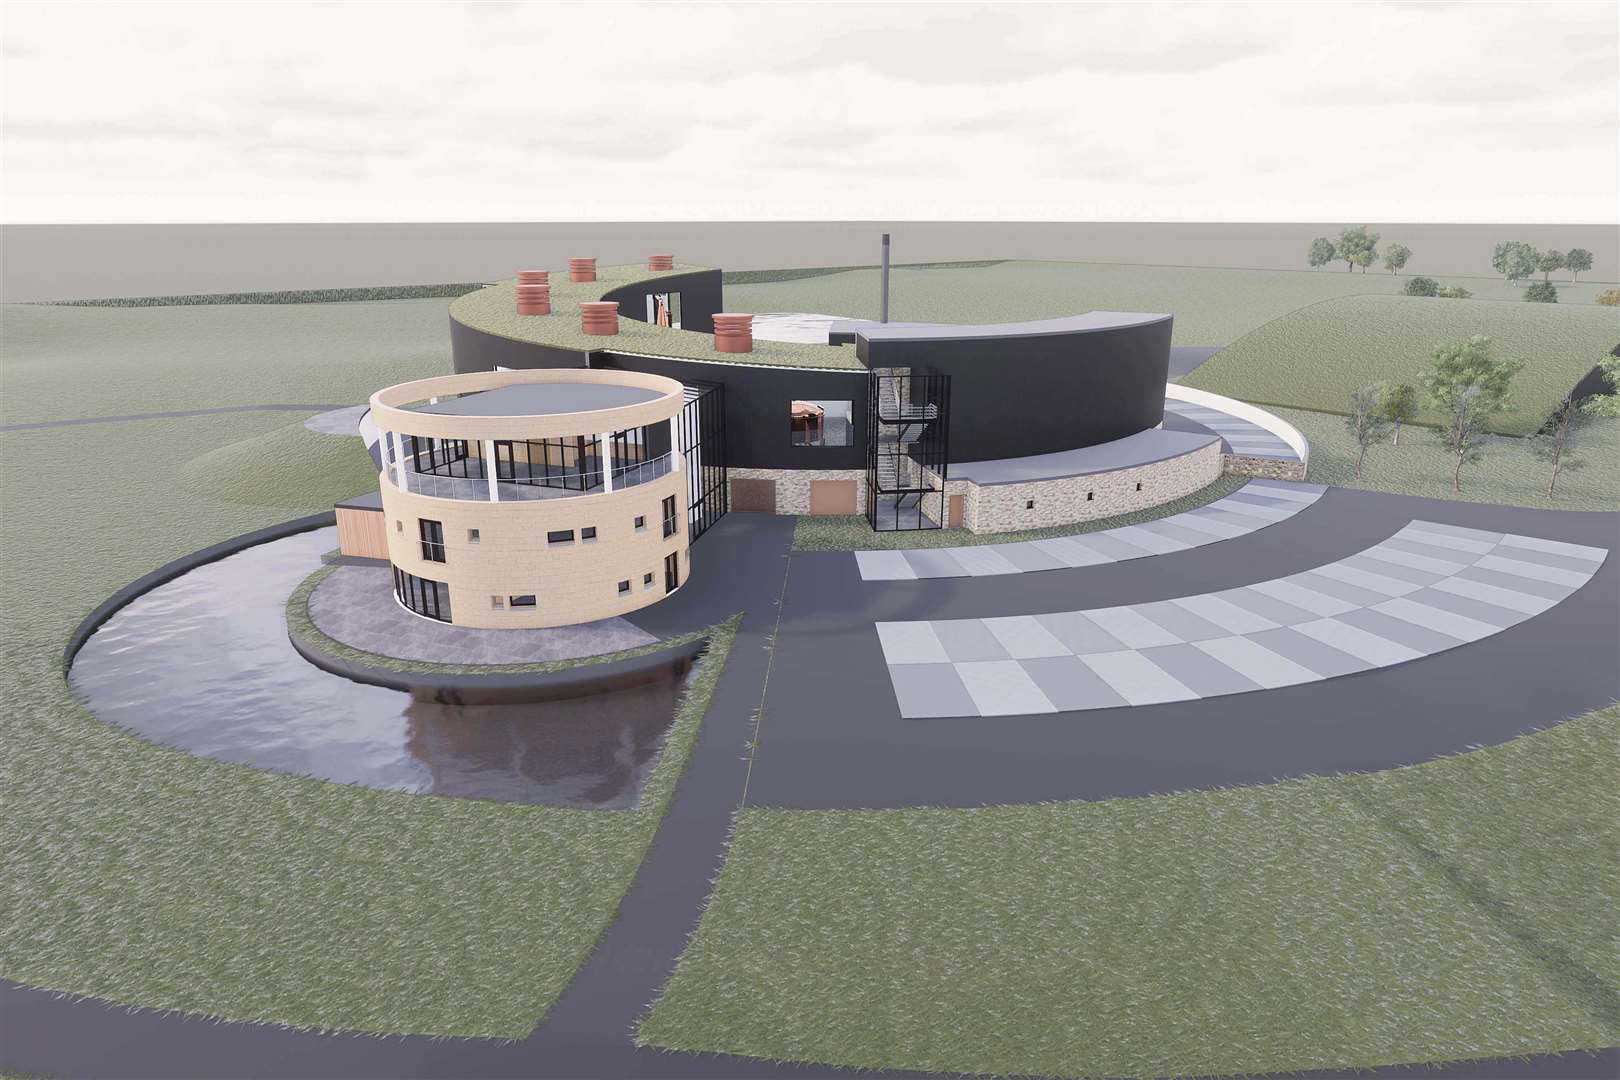 The proposed distillery at Gaich has been designed to hideaway much of the production infrastructure.